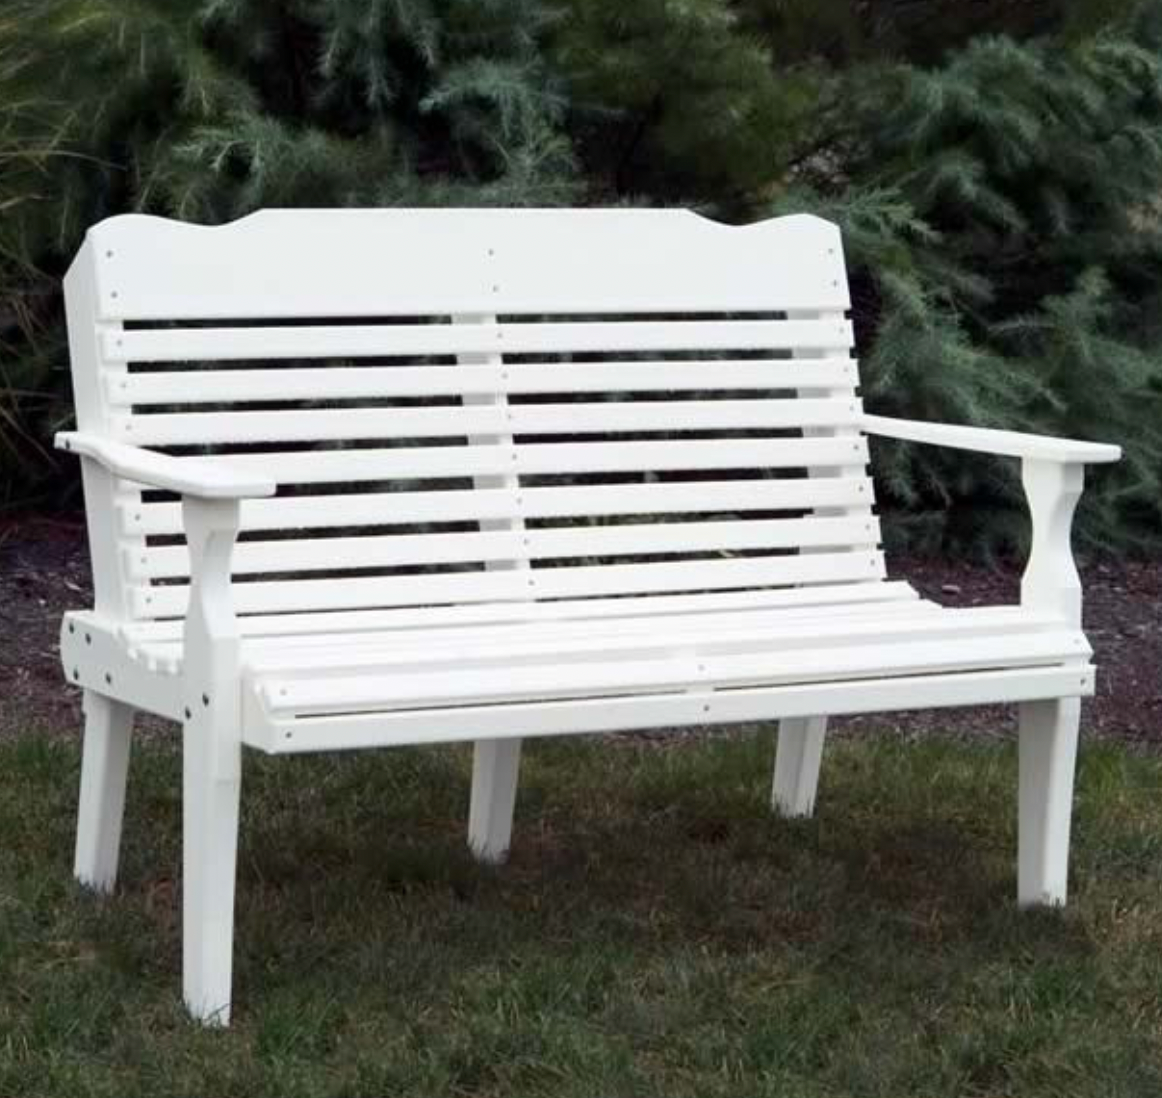 Curve-Back Bench 2 Tone